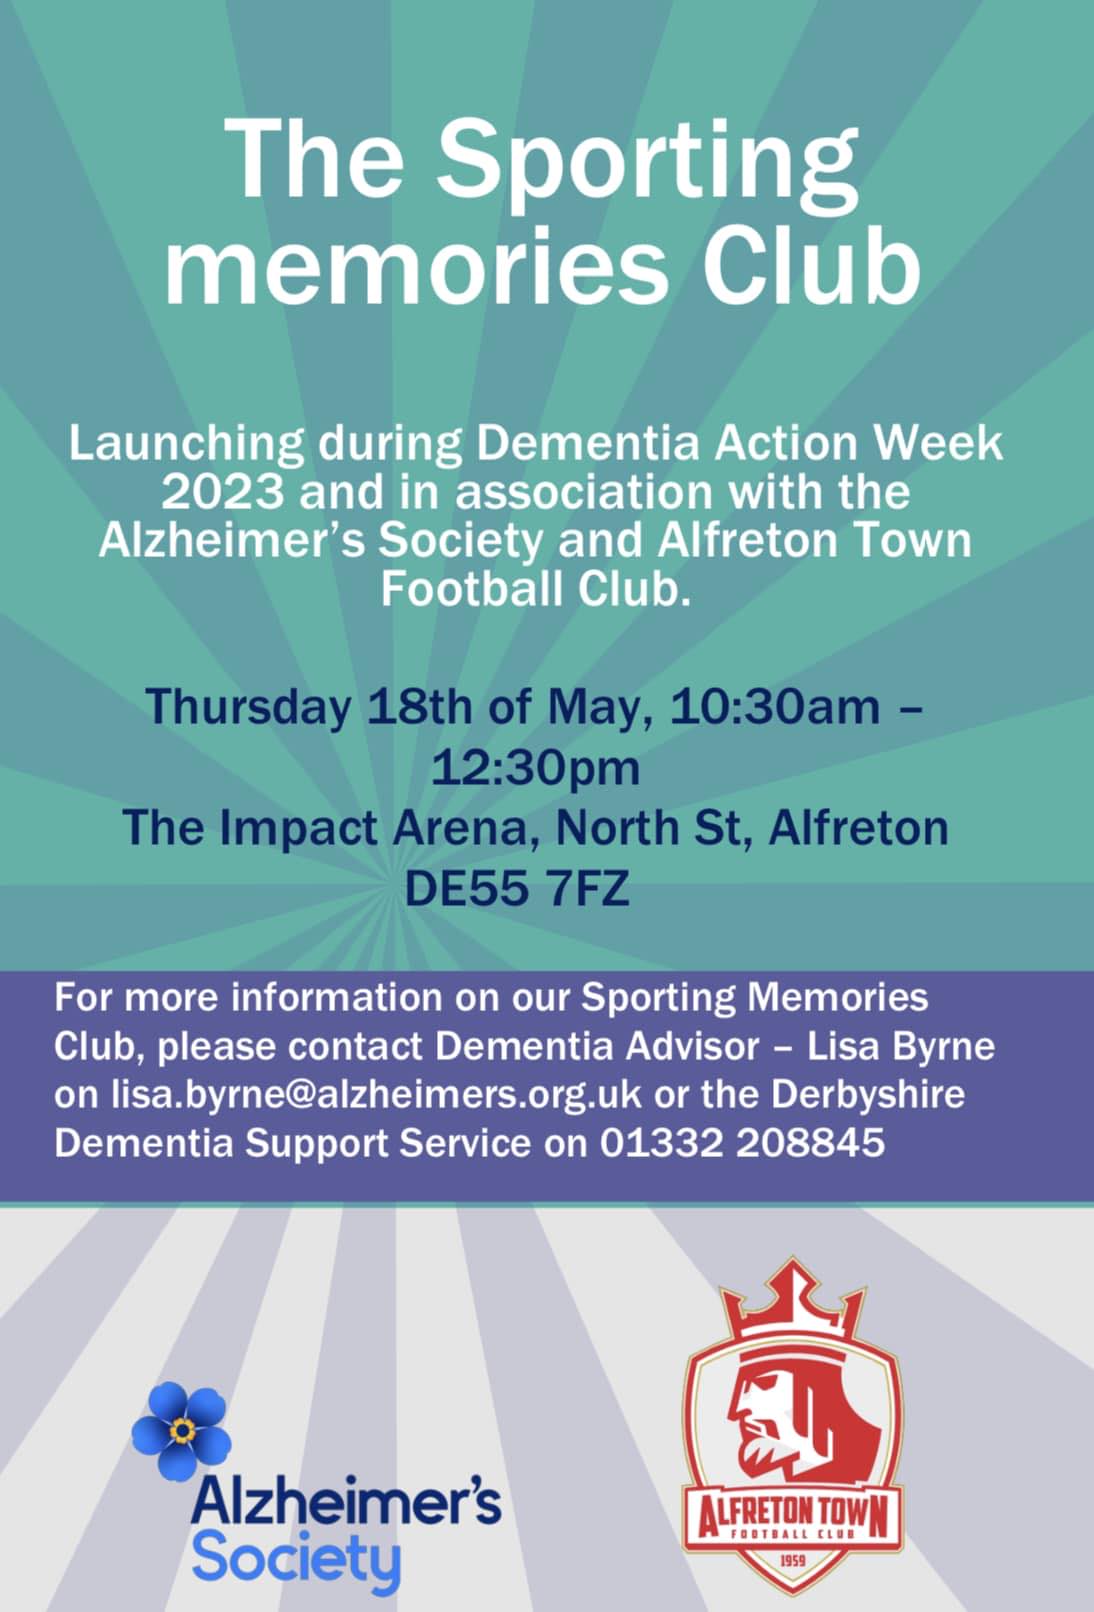 New Sporting Memories Club at Alfreton Town FC to support people with dementia